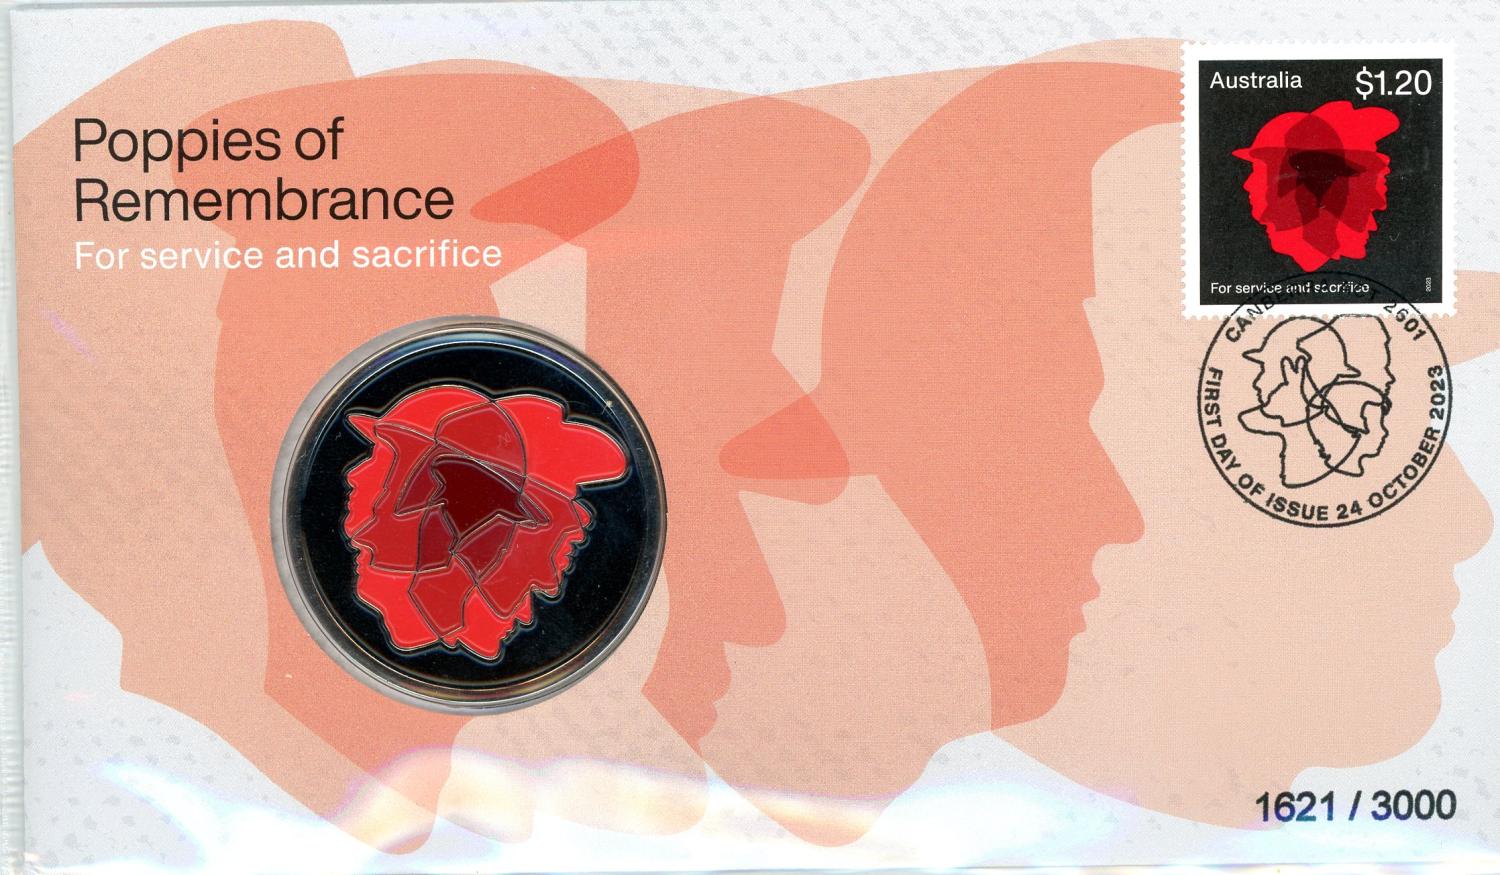 Thumbnail for 2023 Poppies of Remembrance Postal Medallion Cover featuring Red Poppy Medallion 'For Service and Sacrifice'